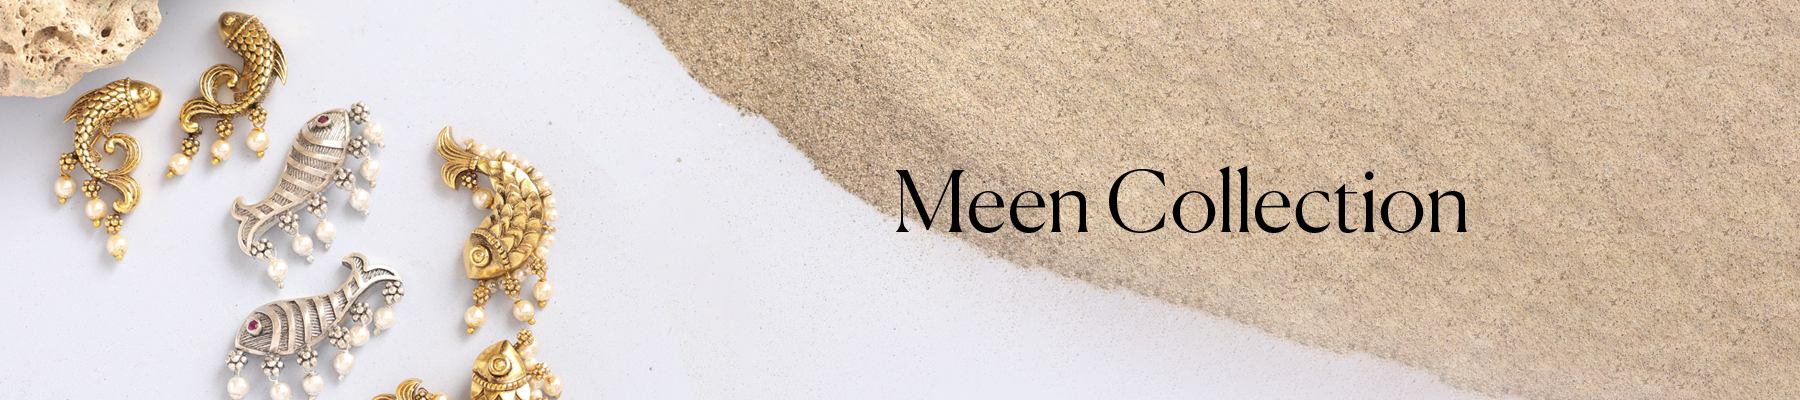 Meen Collection